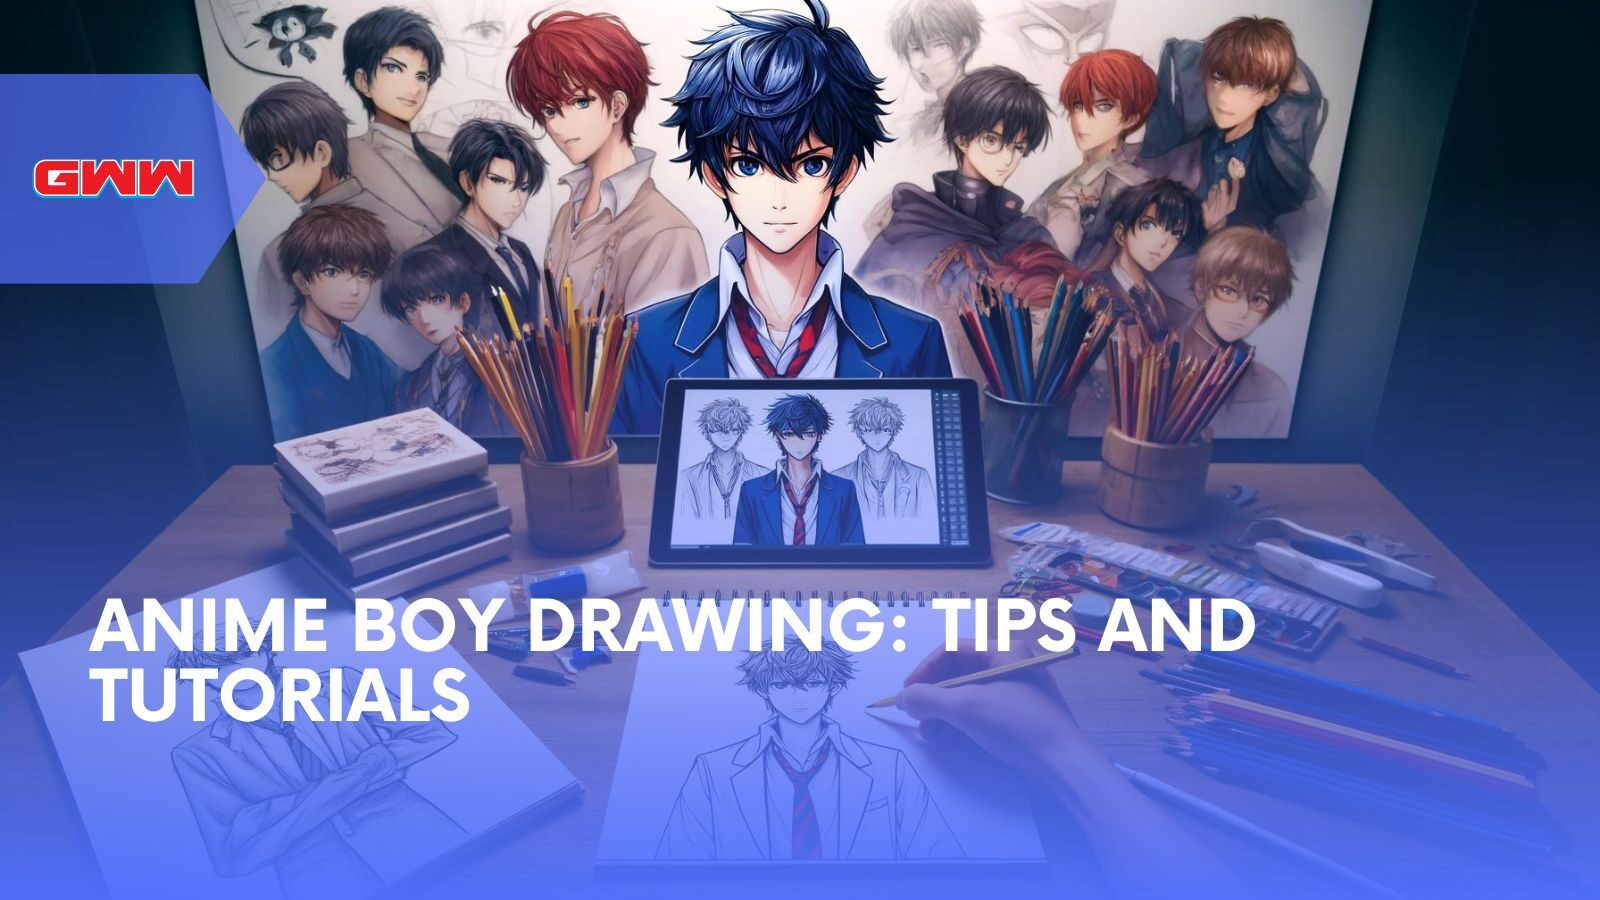 Anime Boy Drawing: Tips and Tutorials